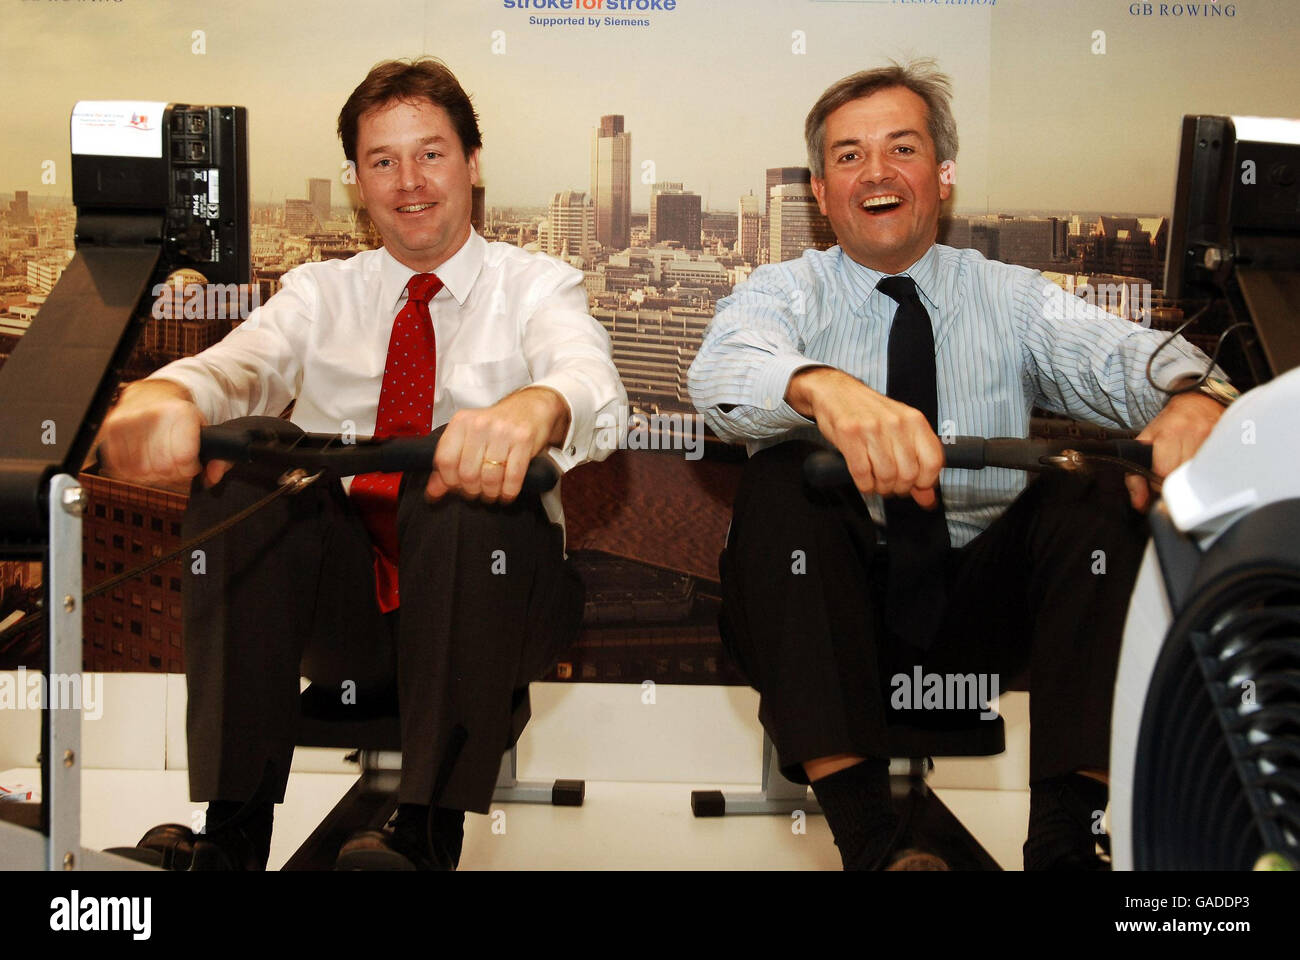 Nick Clegg (left) MP with Chris Huhne MP the two prospective Leaders of the Liberal Democratic Party, on the rowing machines at the CBI (Confederation of British Industry) Conference 2007, at the design centre in North London, this morning. Stock Photo